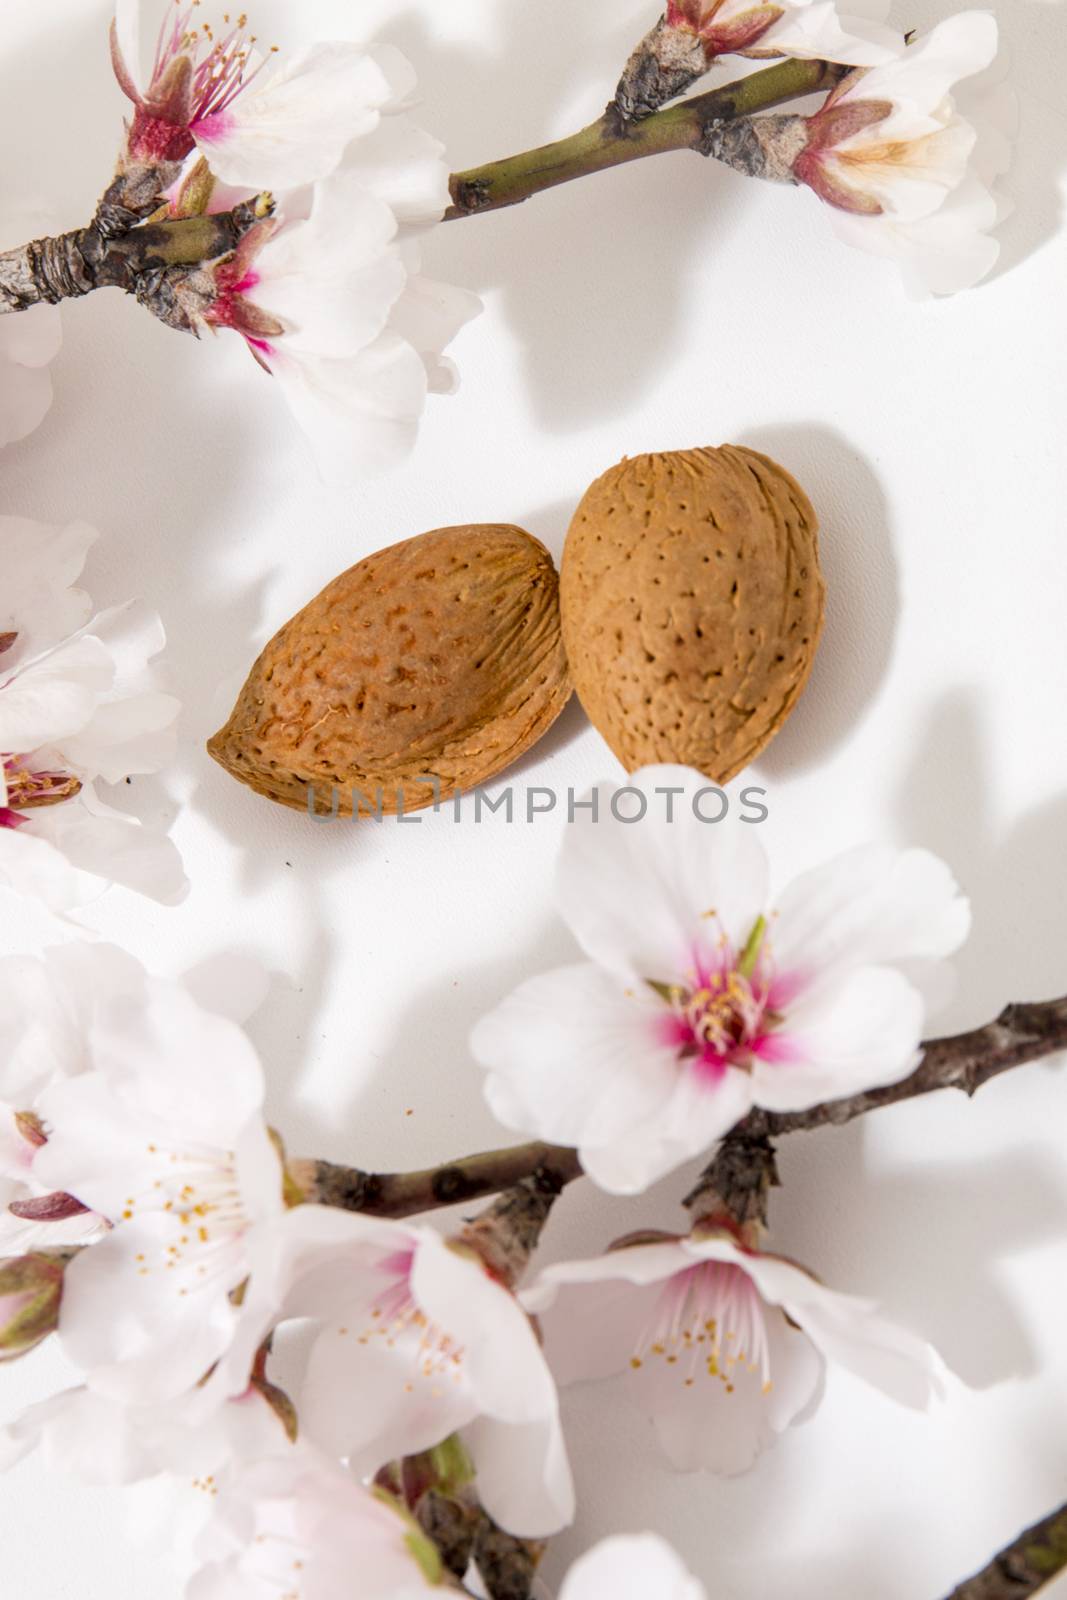 almond tree branch with almonds isolated on a white background.